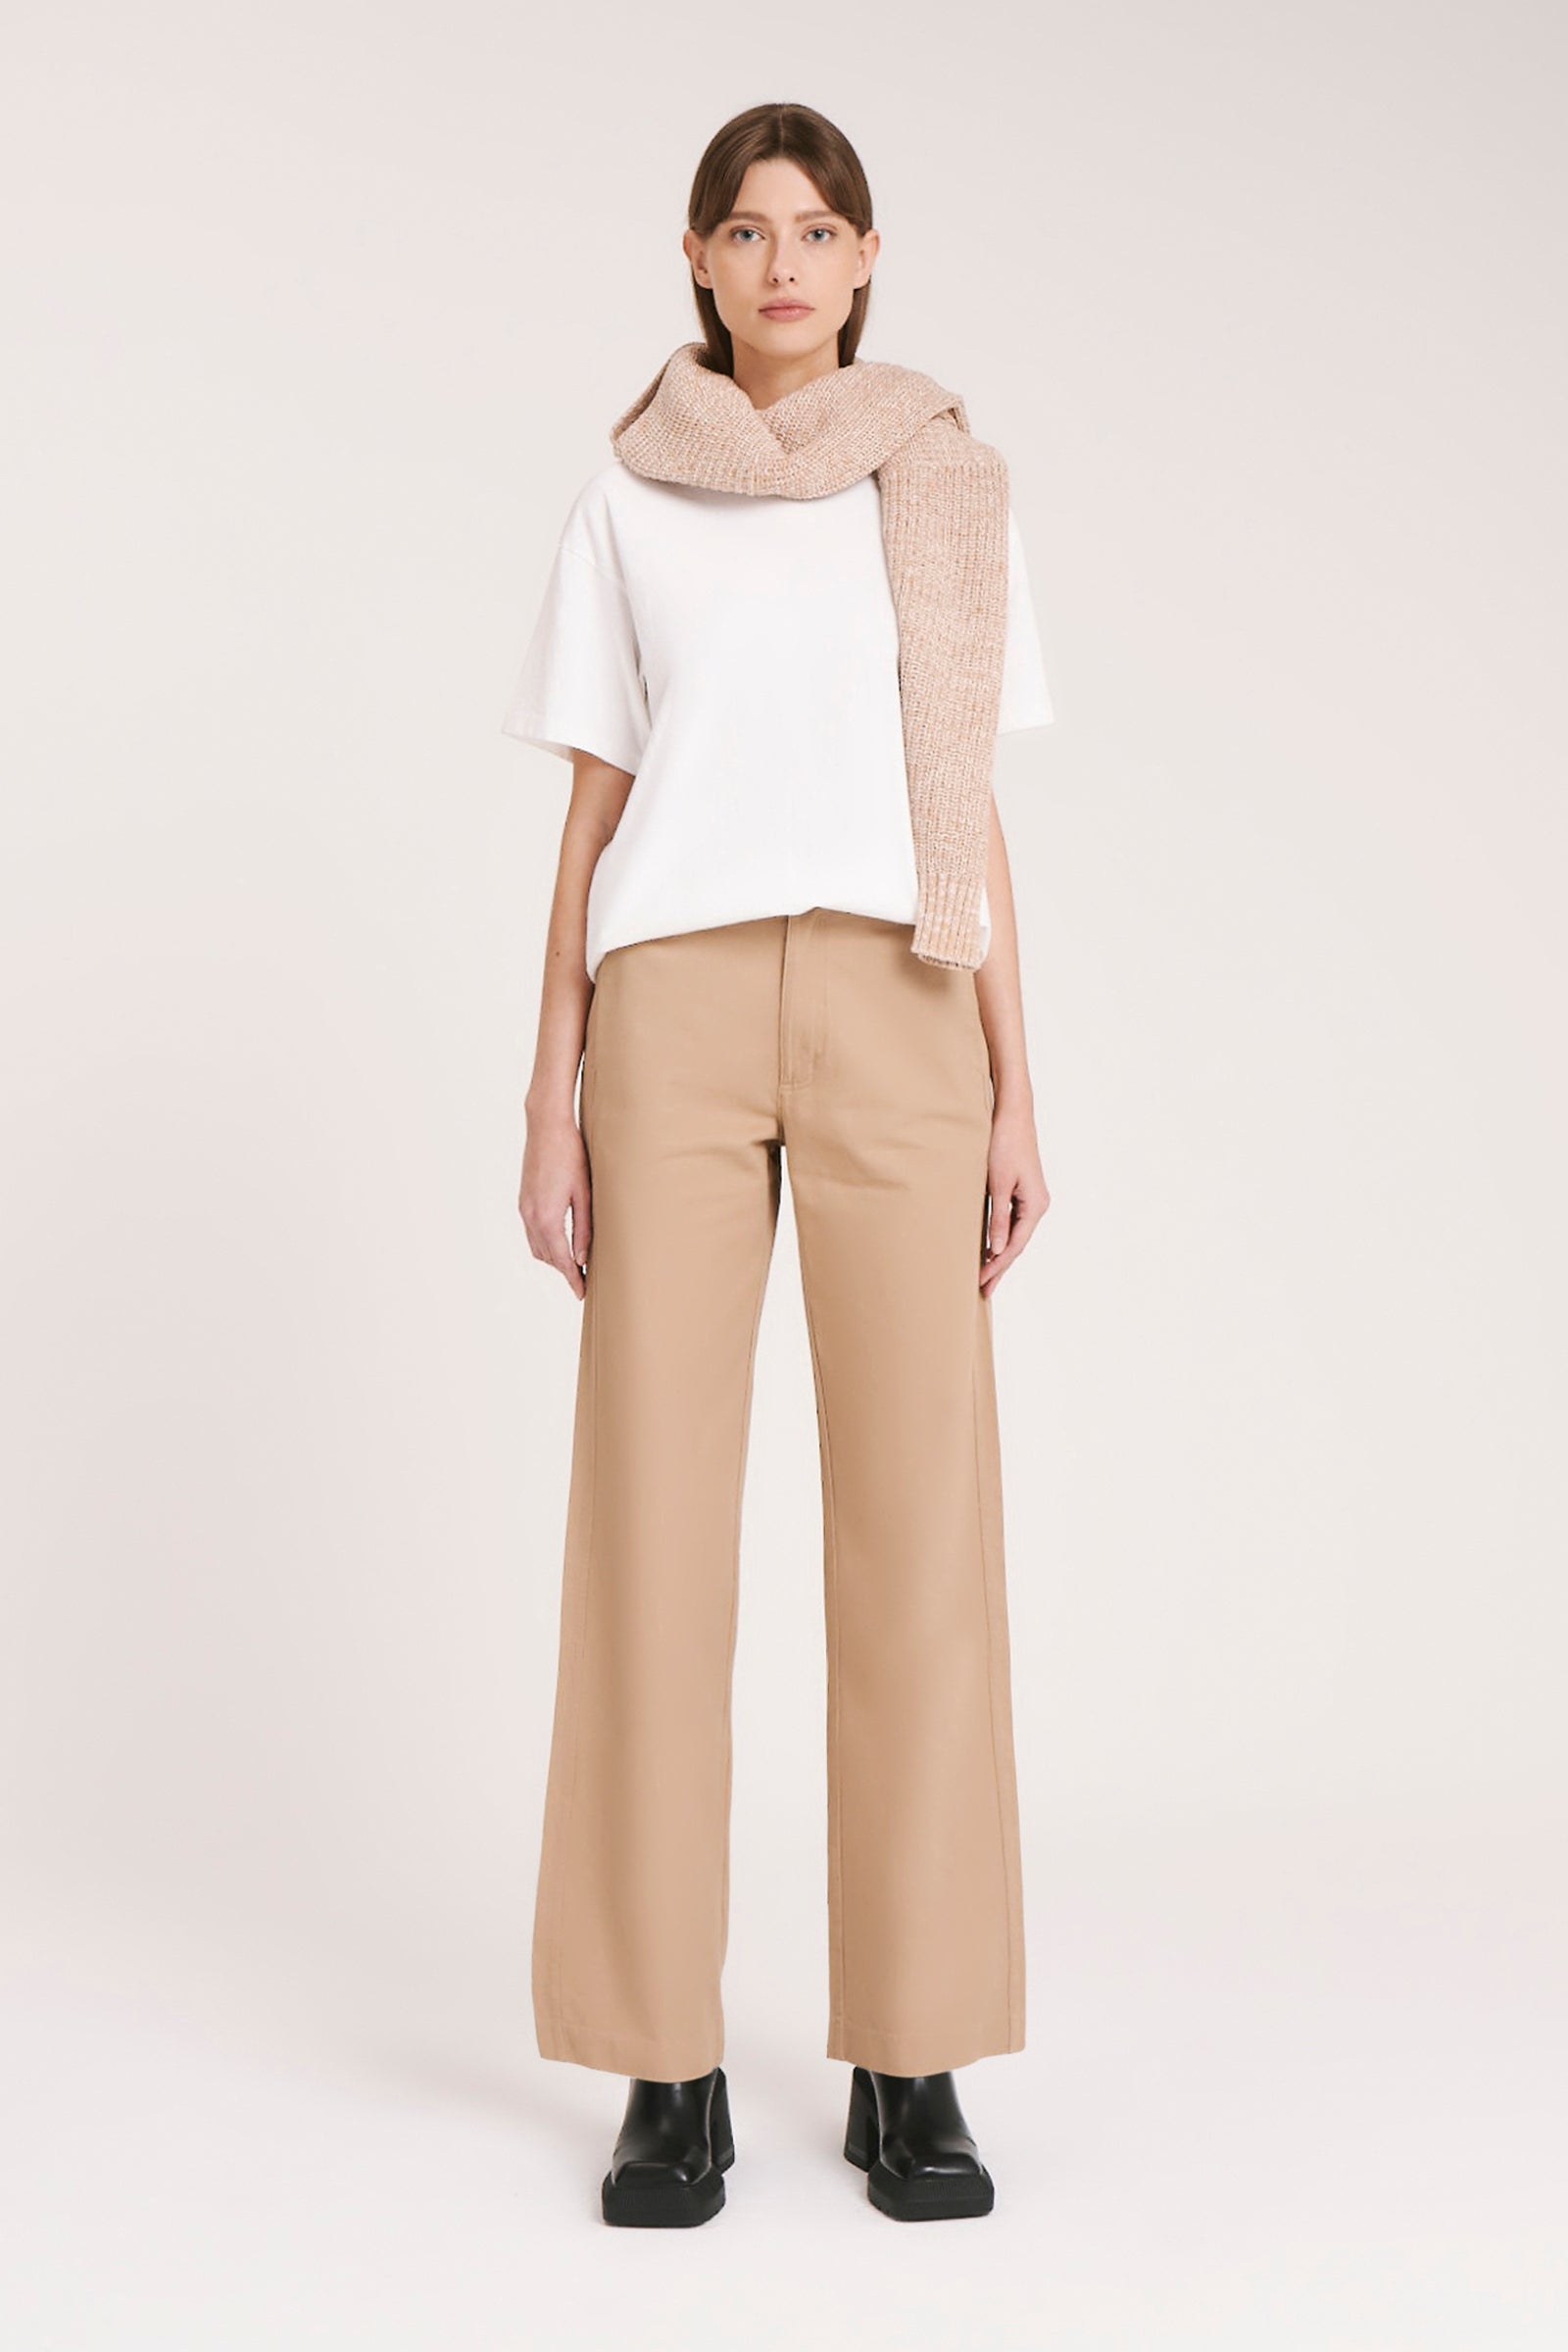 Nude Lucy Cooper Pant In A Brown Oak Colour 